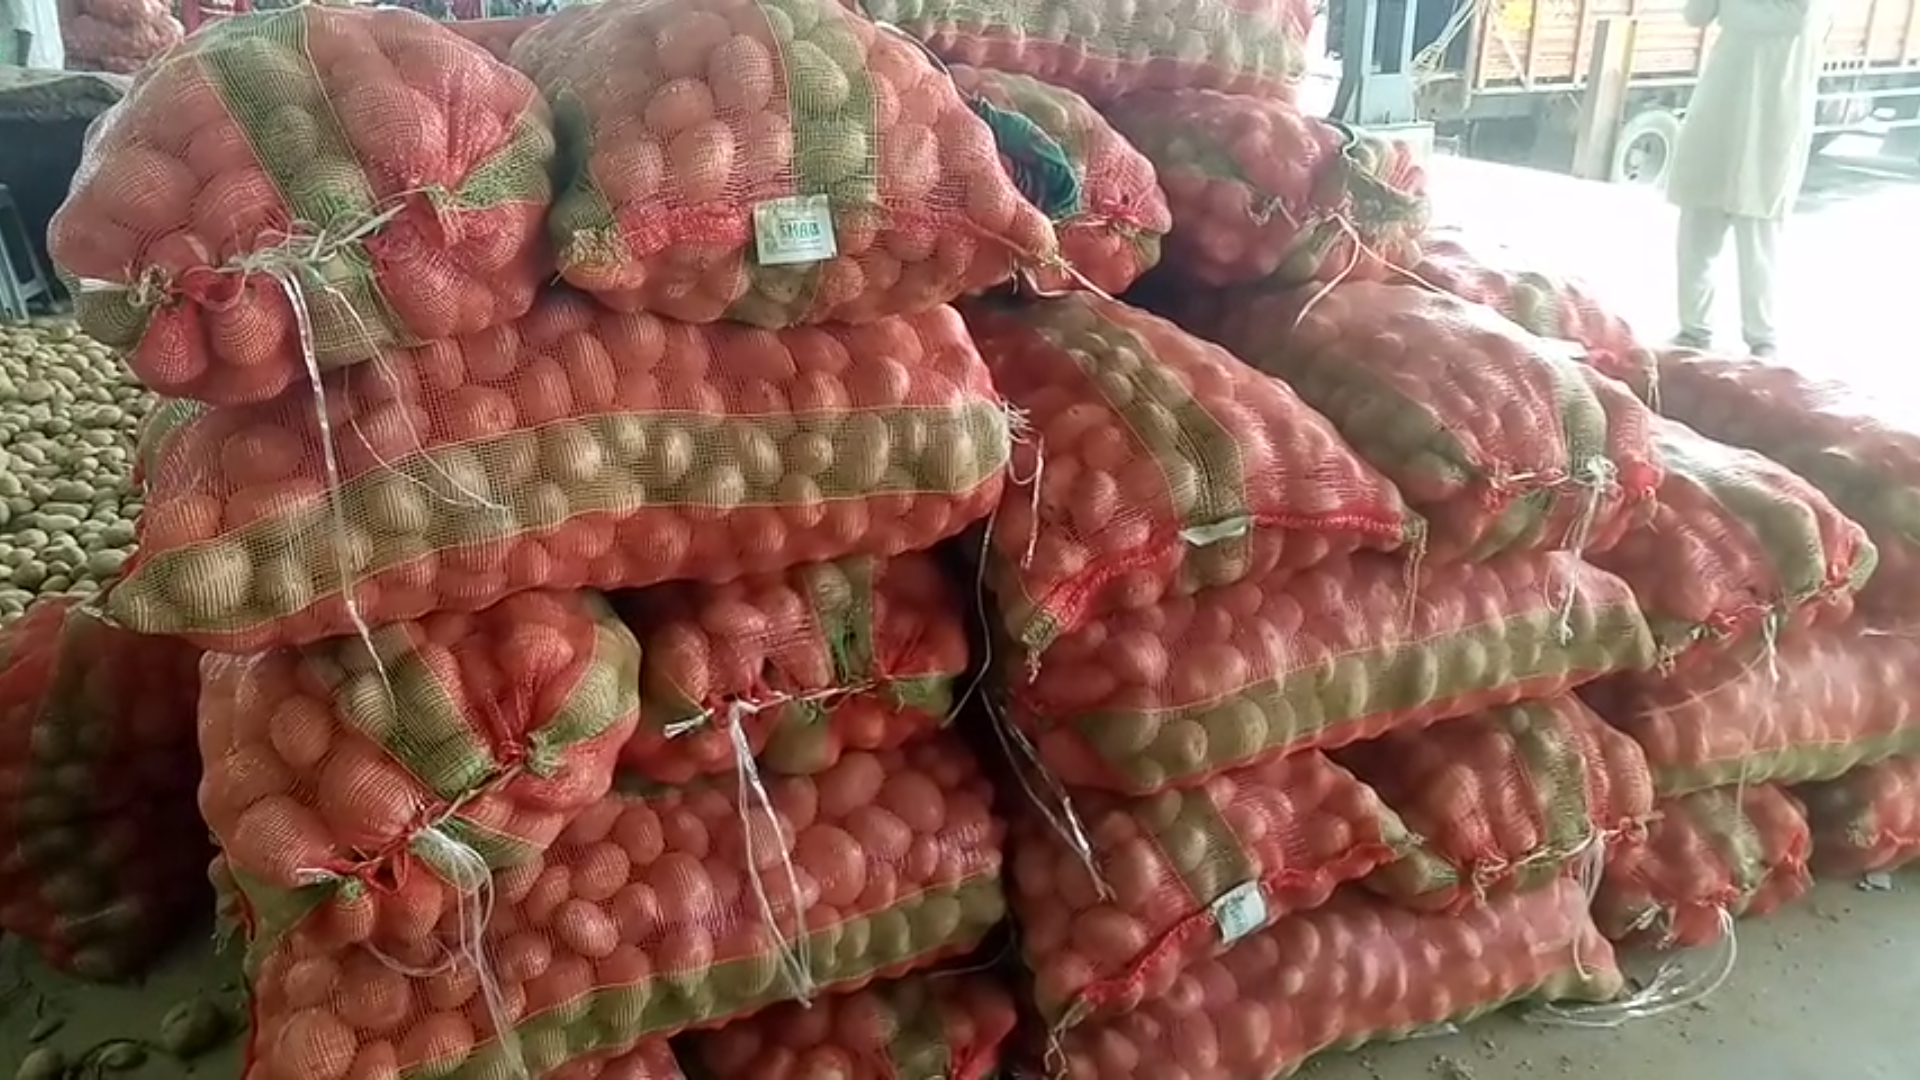 Lockdown caused heavy recession in vegetable and fruit markets Azadpur Mandi